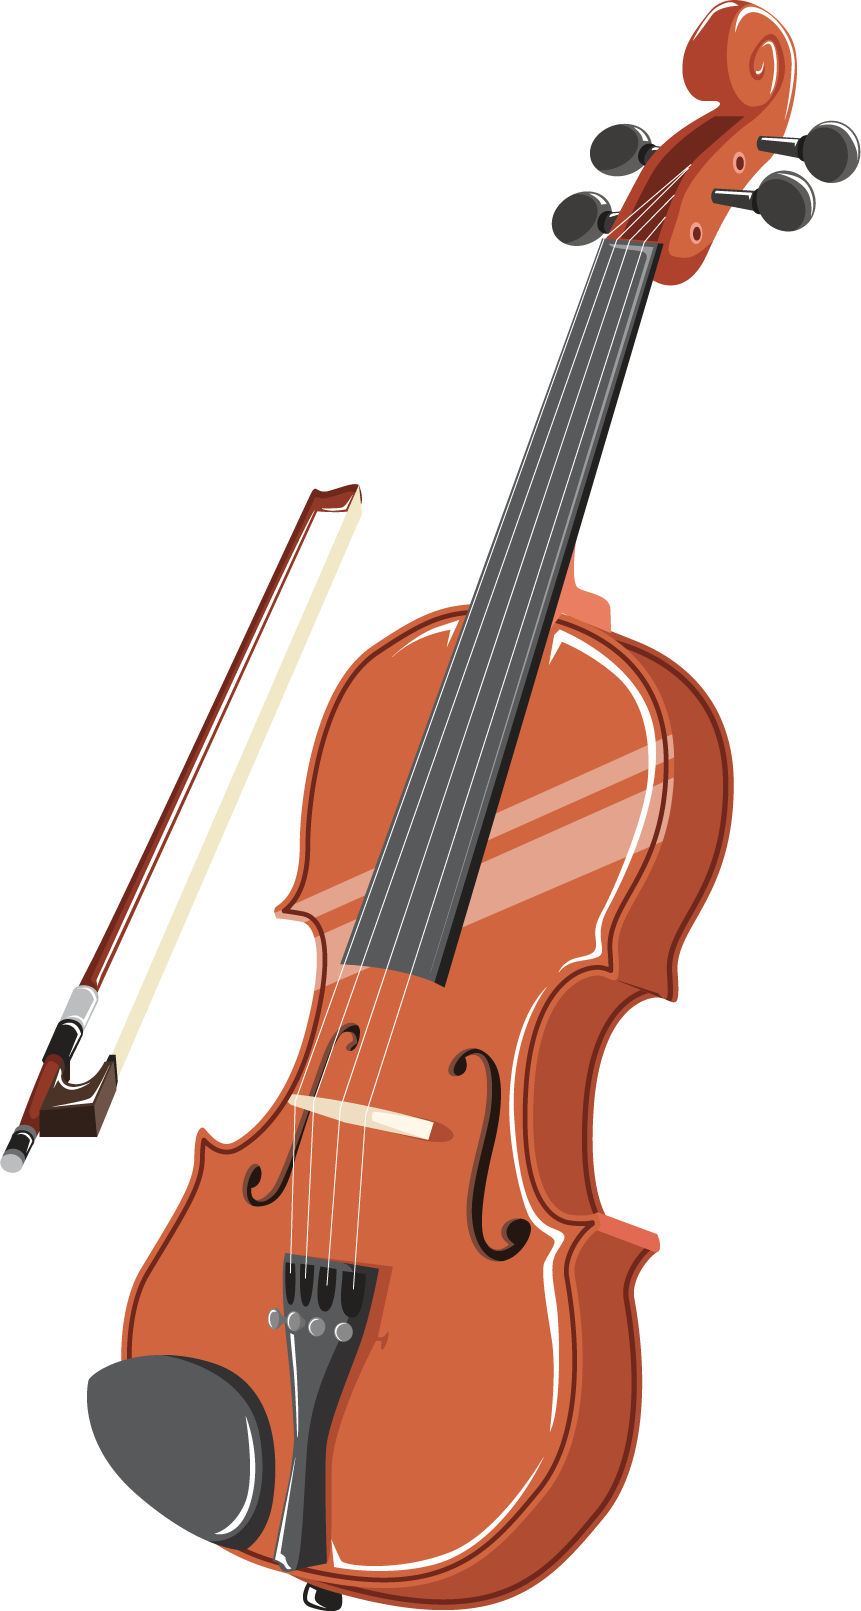 A Violin And Bow On A Black Background